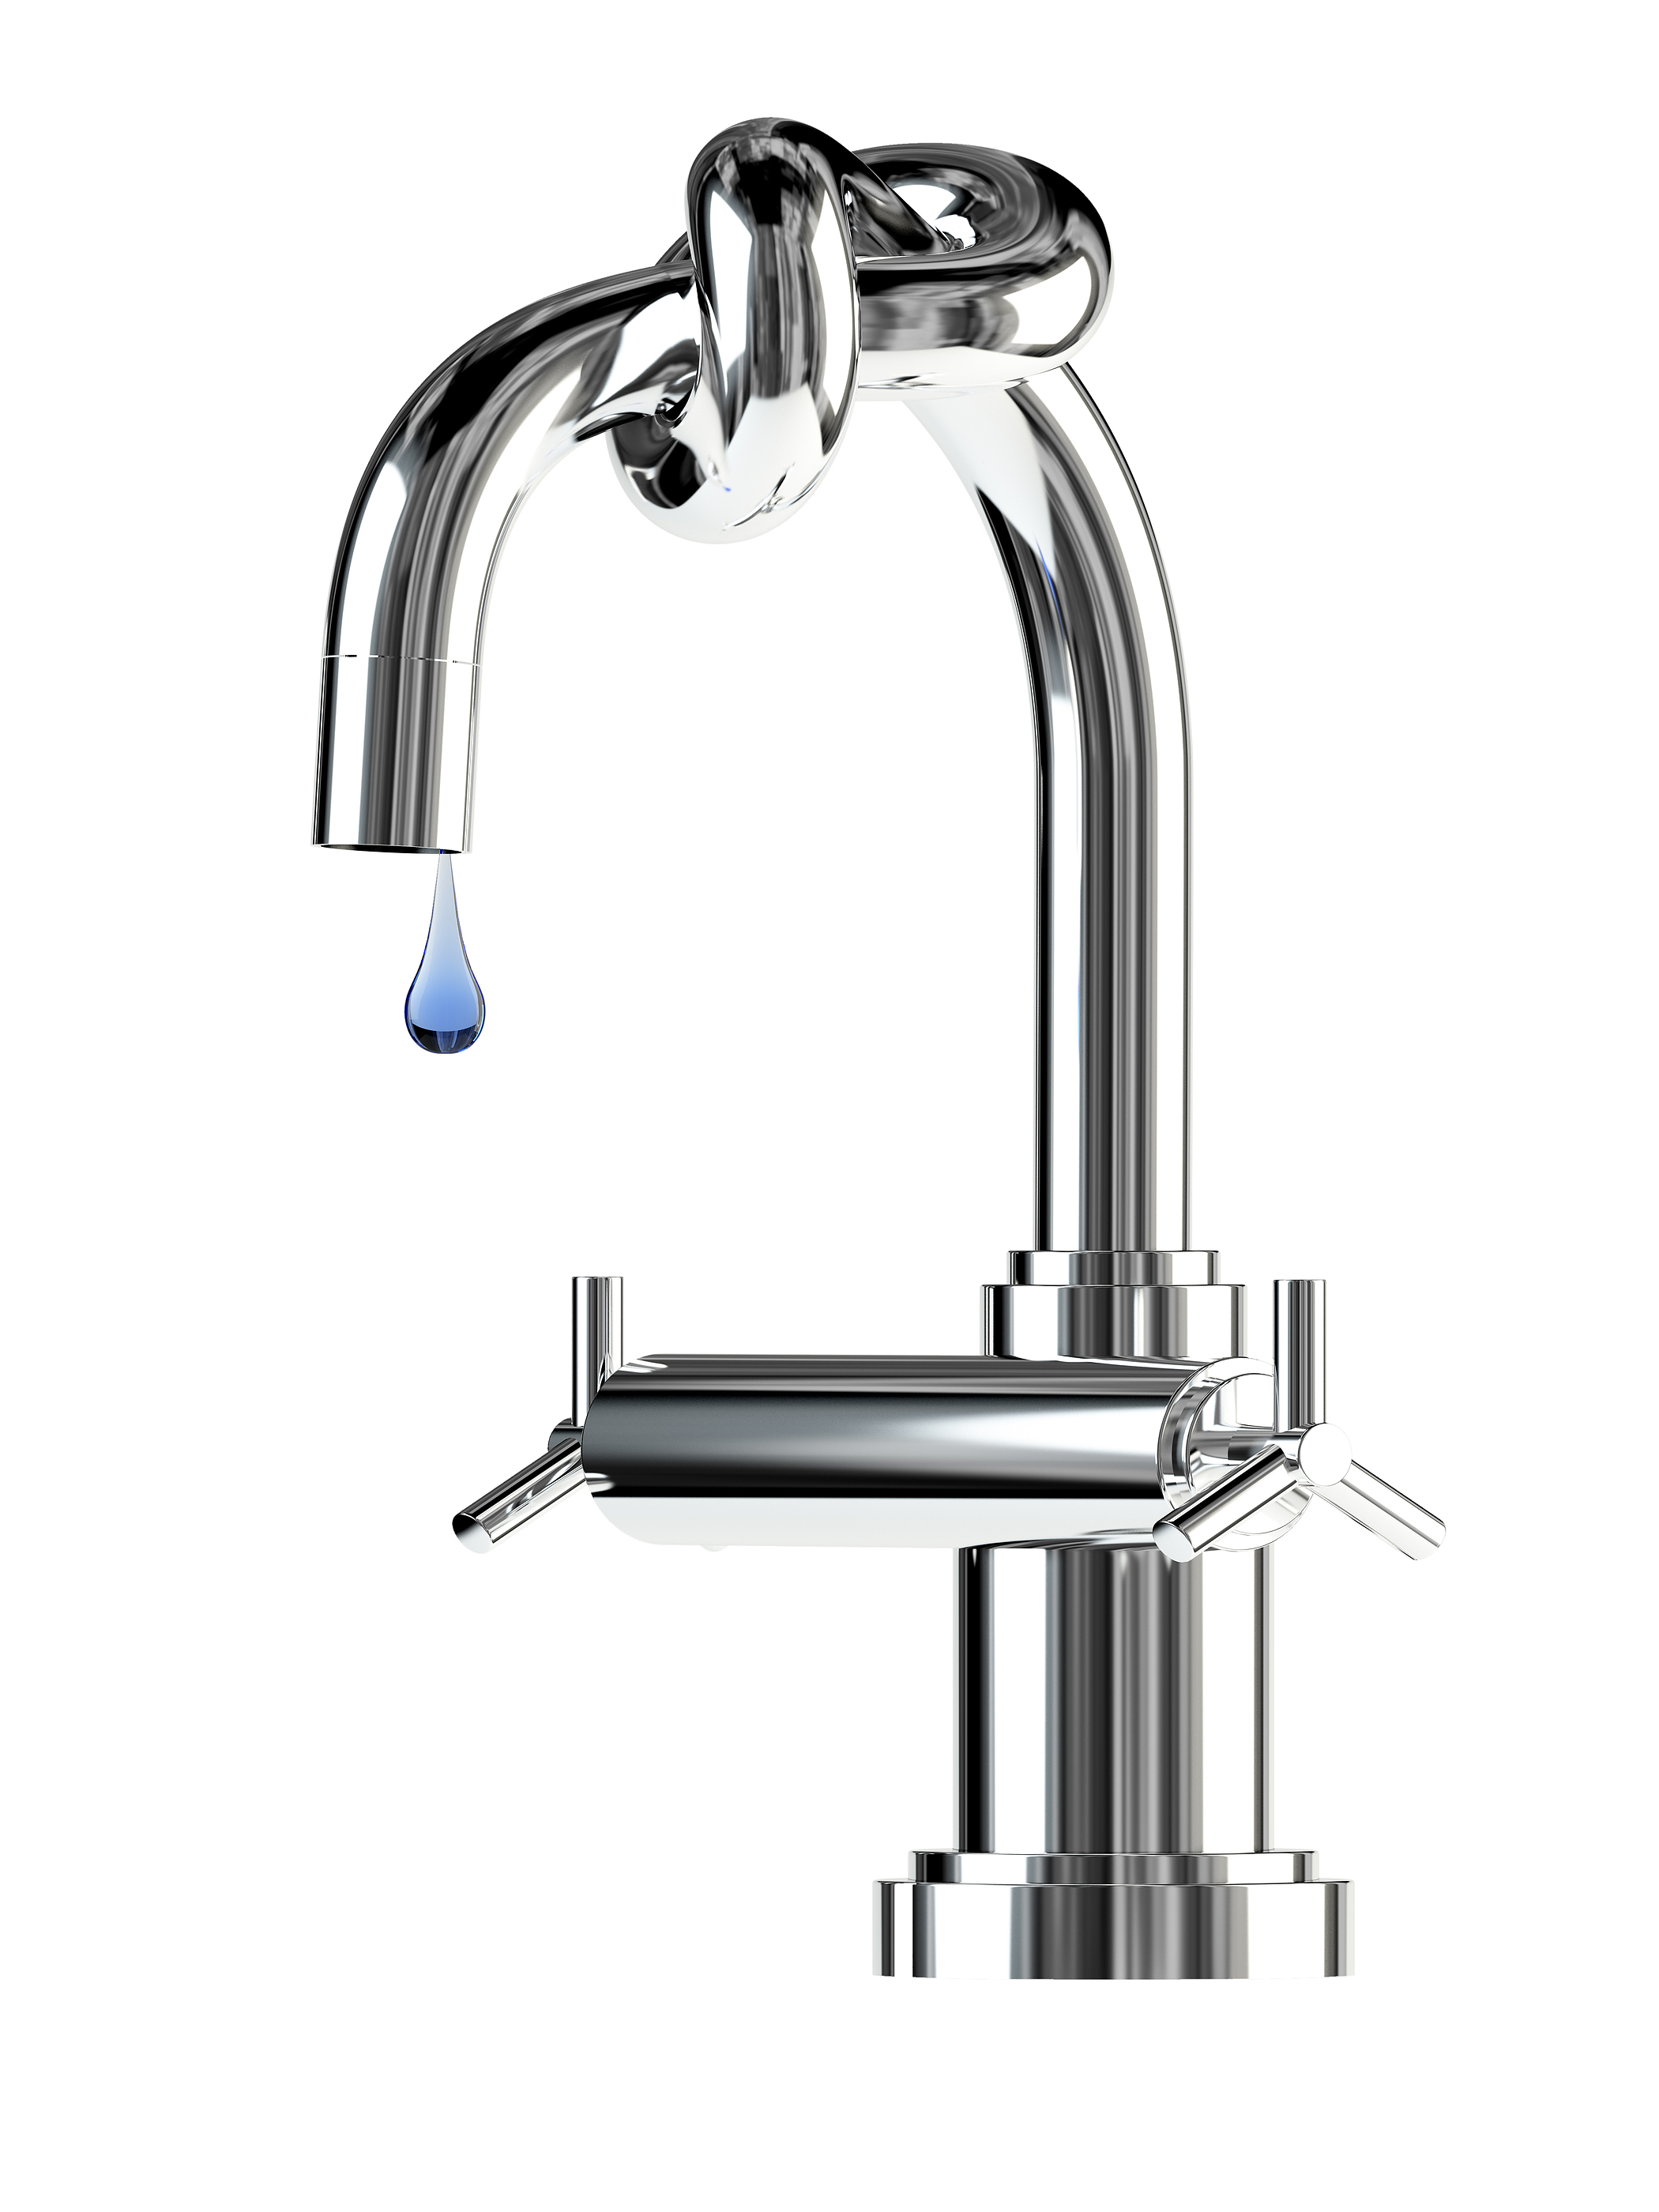 bigstock Faucet With Knot 7520132